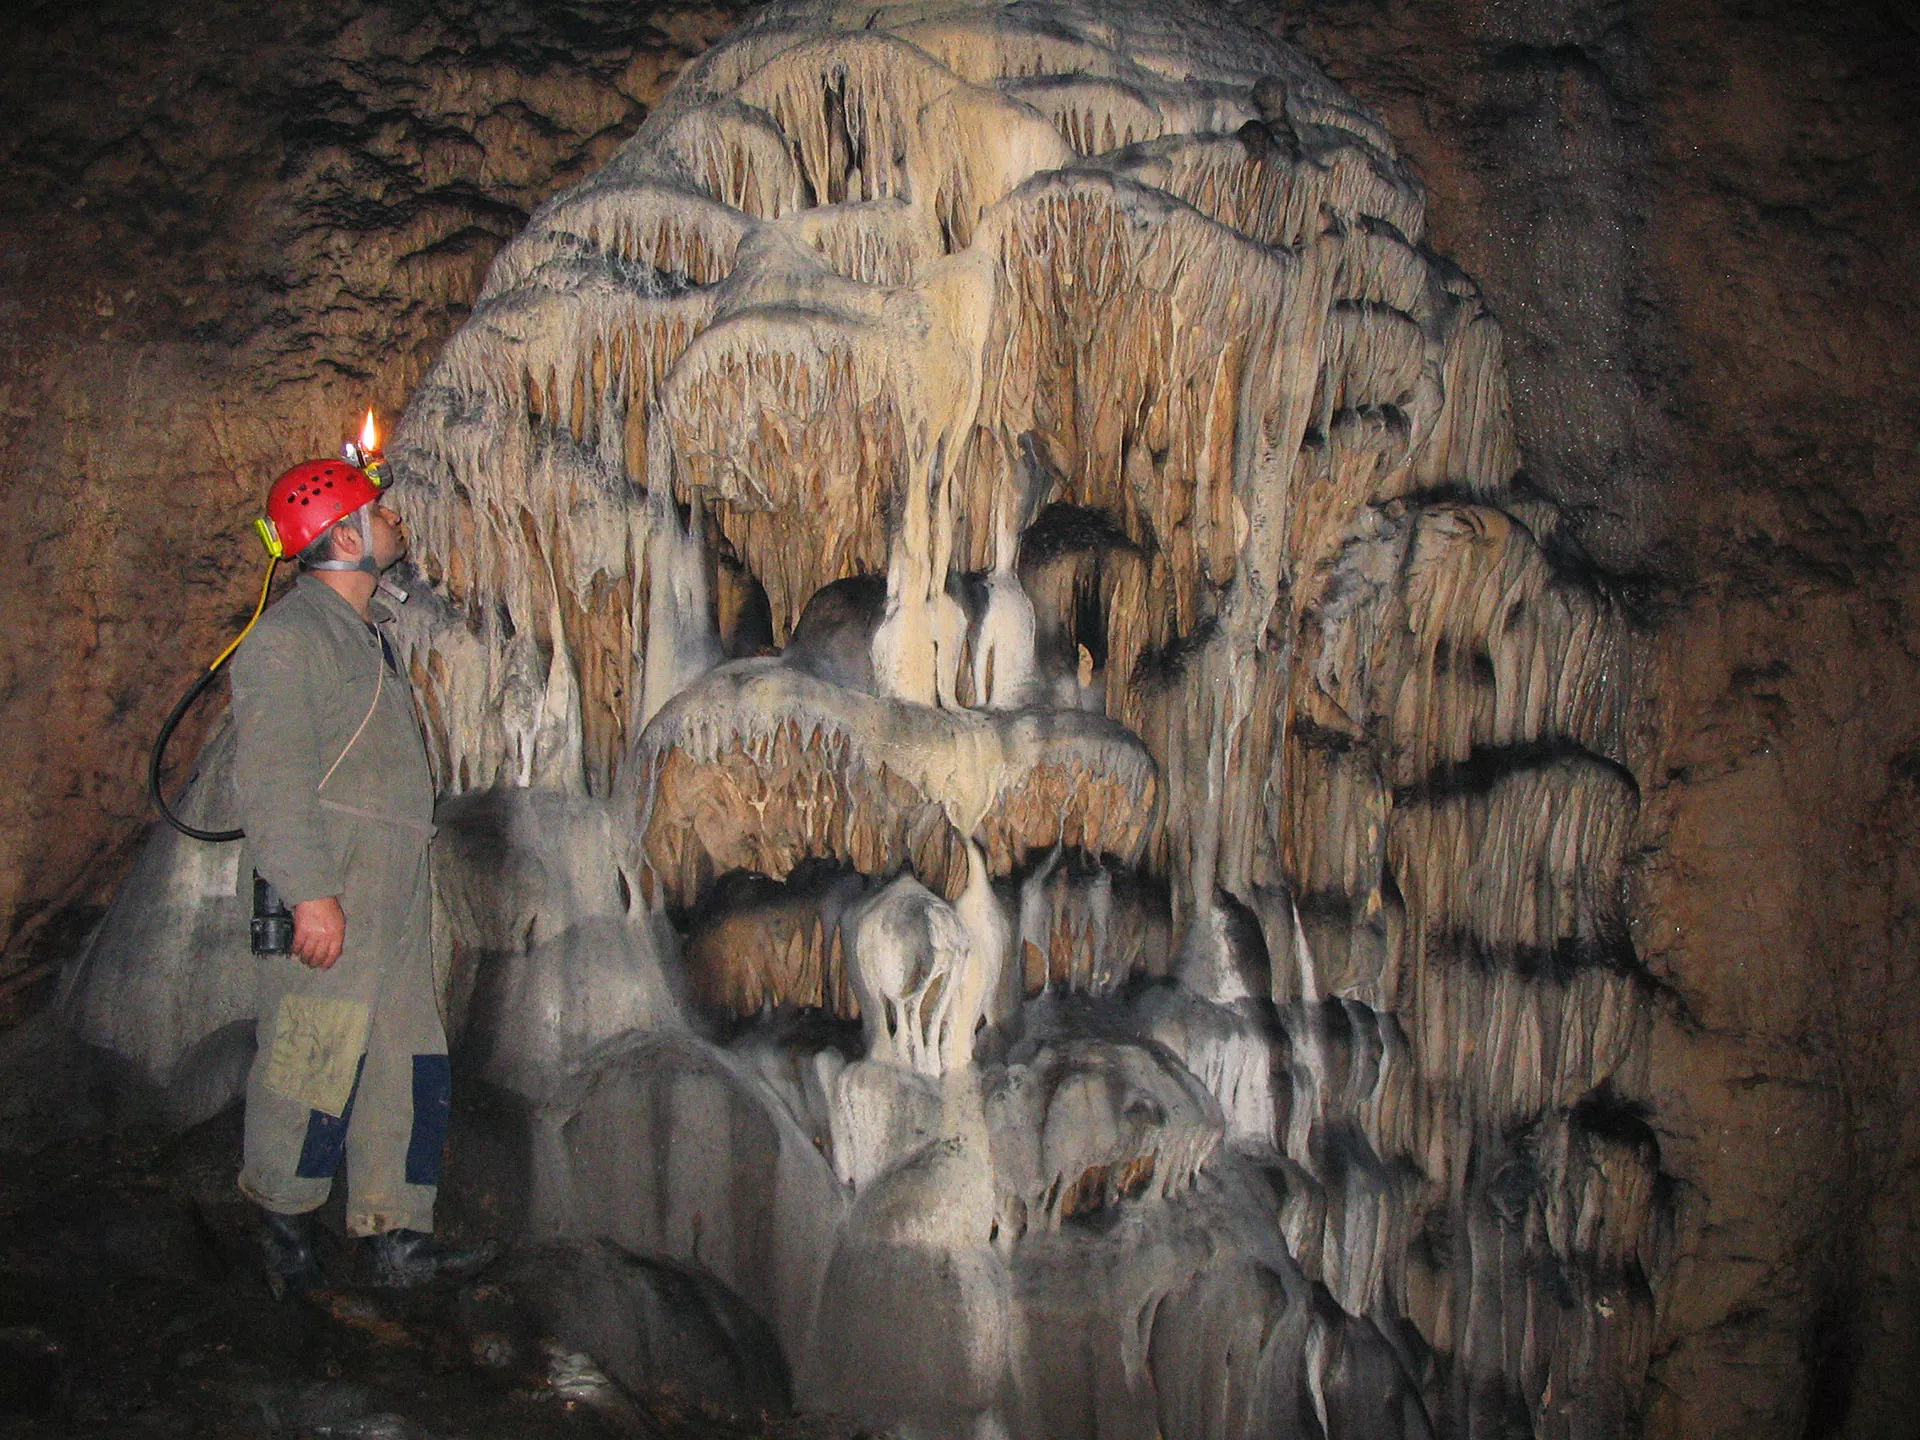 Ceremosnja Cave in Serbia, Europe | Caves & Underground Places - Rated 0.9